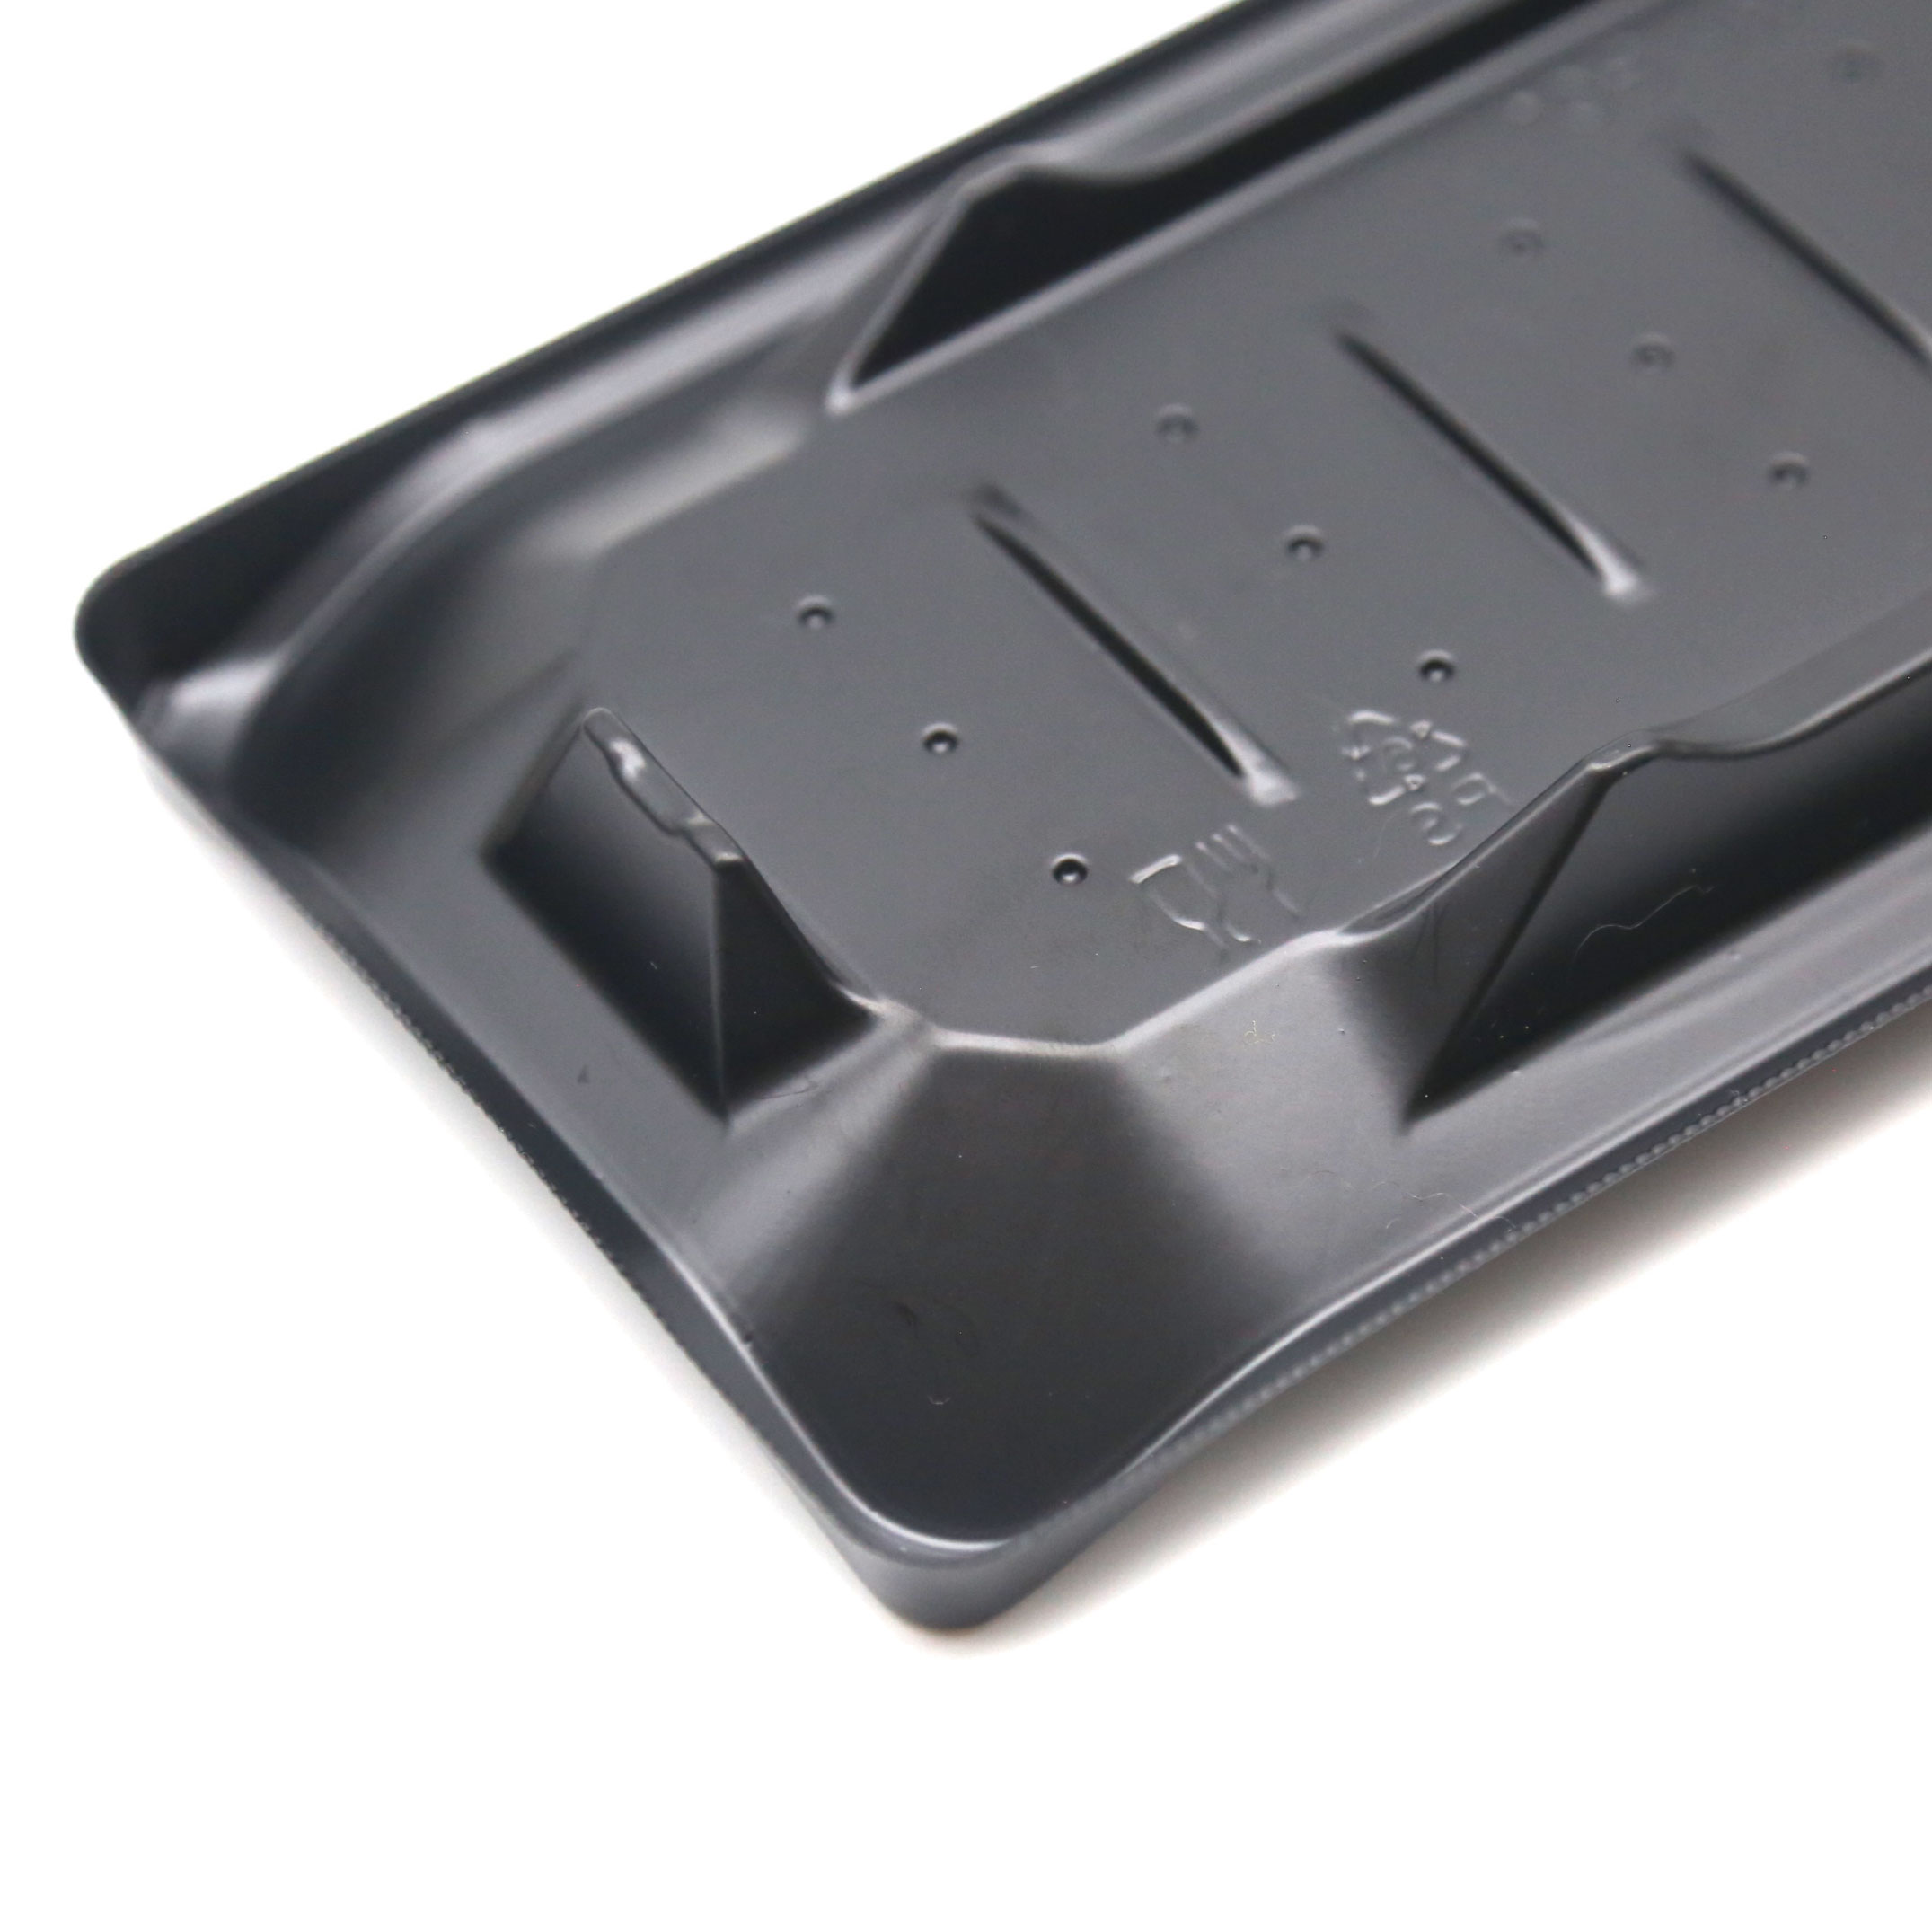 Sushi box WL-B01 has leak proof features and a simple bottom design.